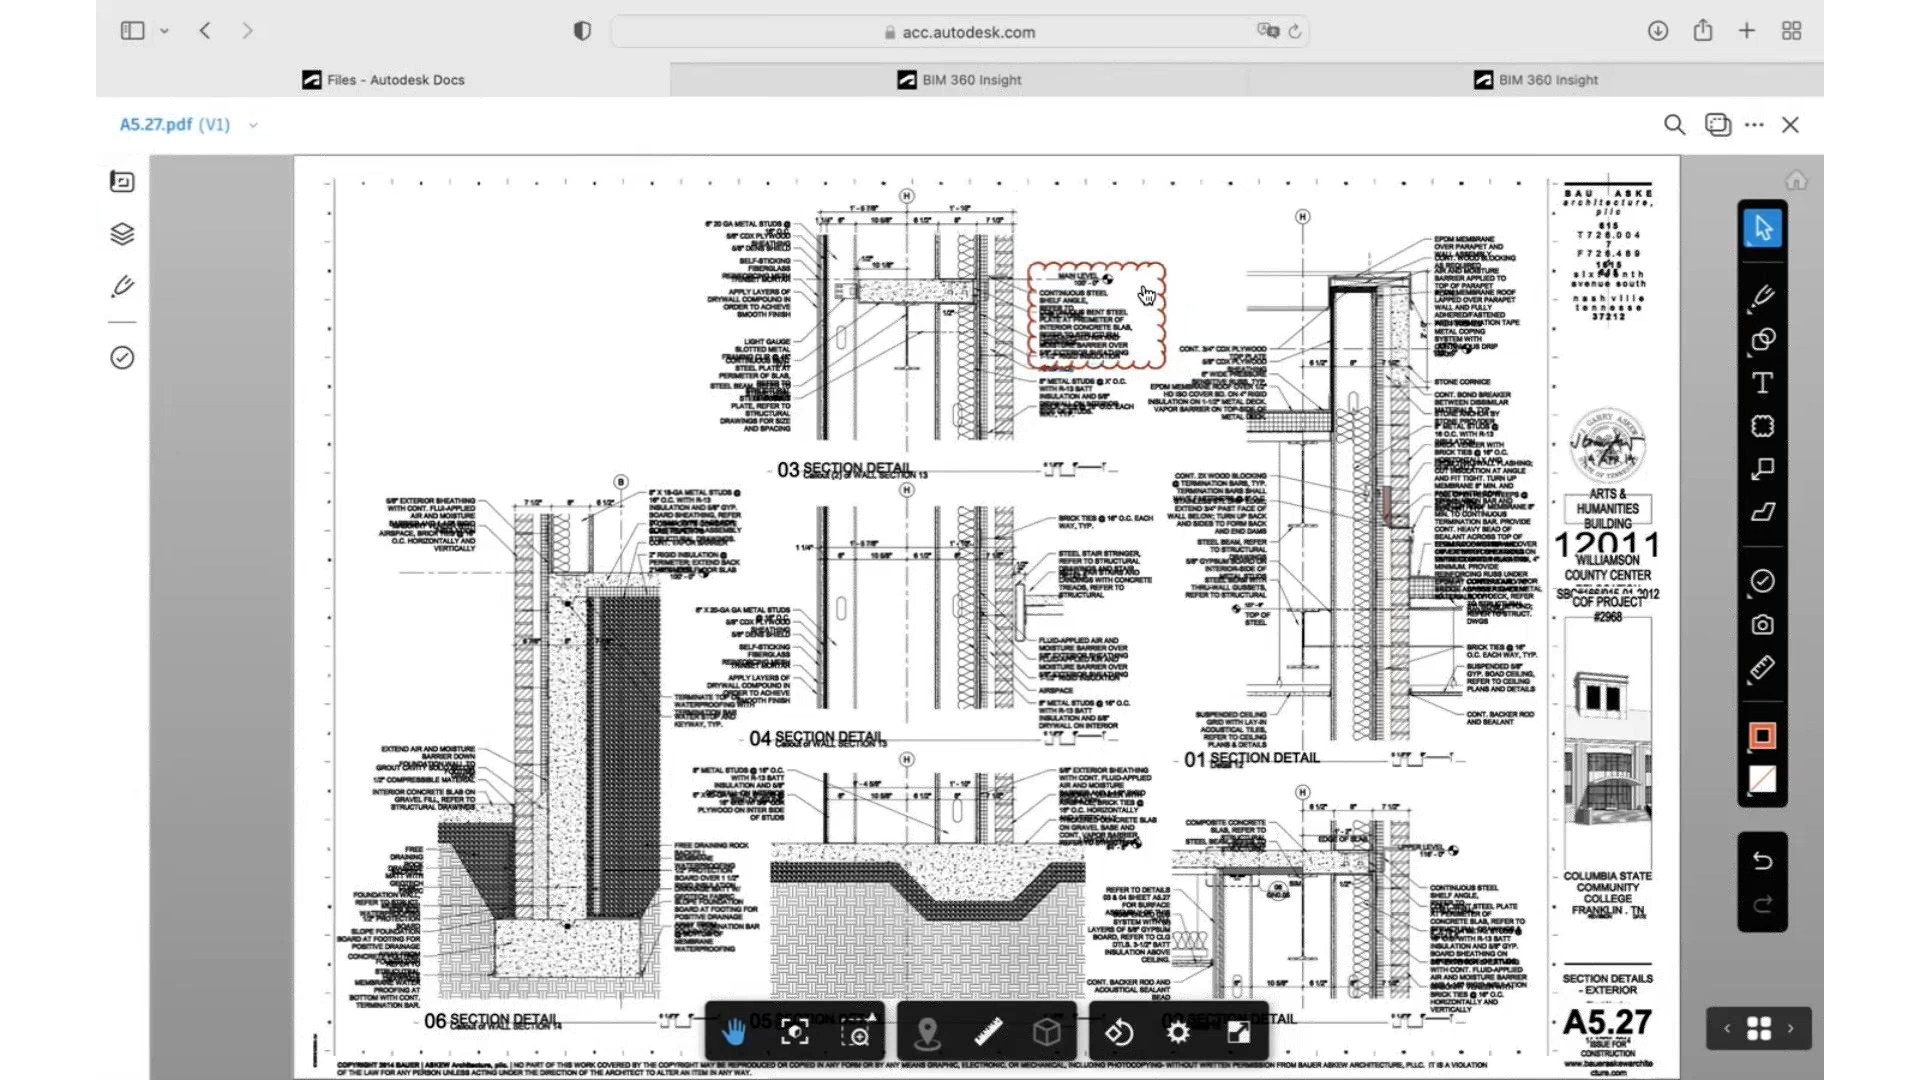 Autodesk Construction Cloud: Reduce Risk, Improve Productivity, and Save Time